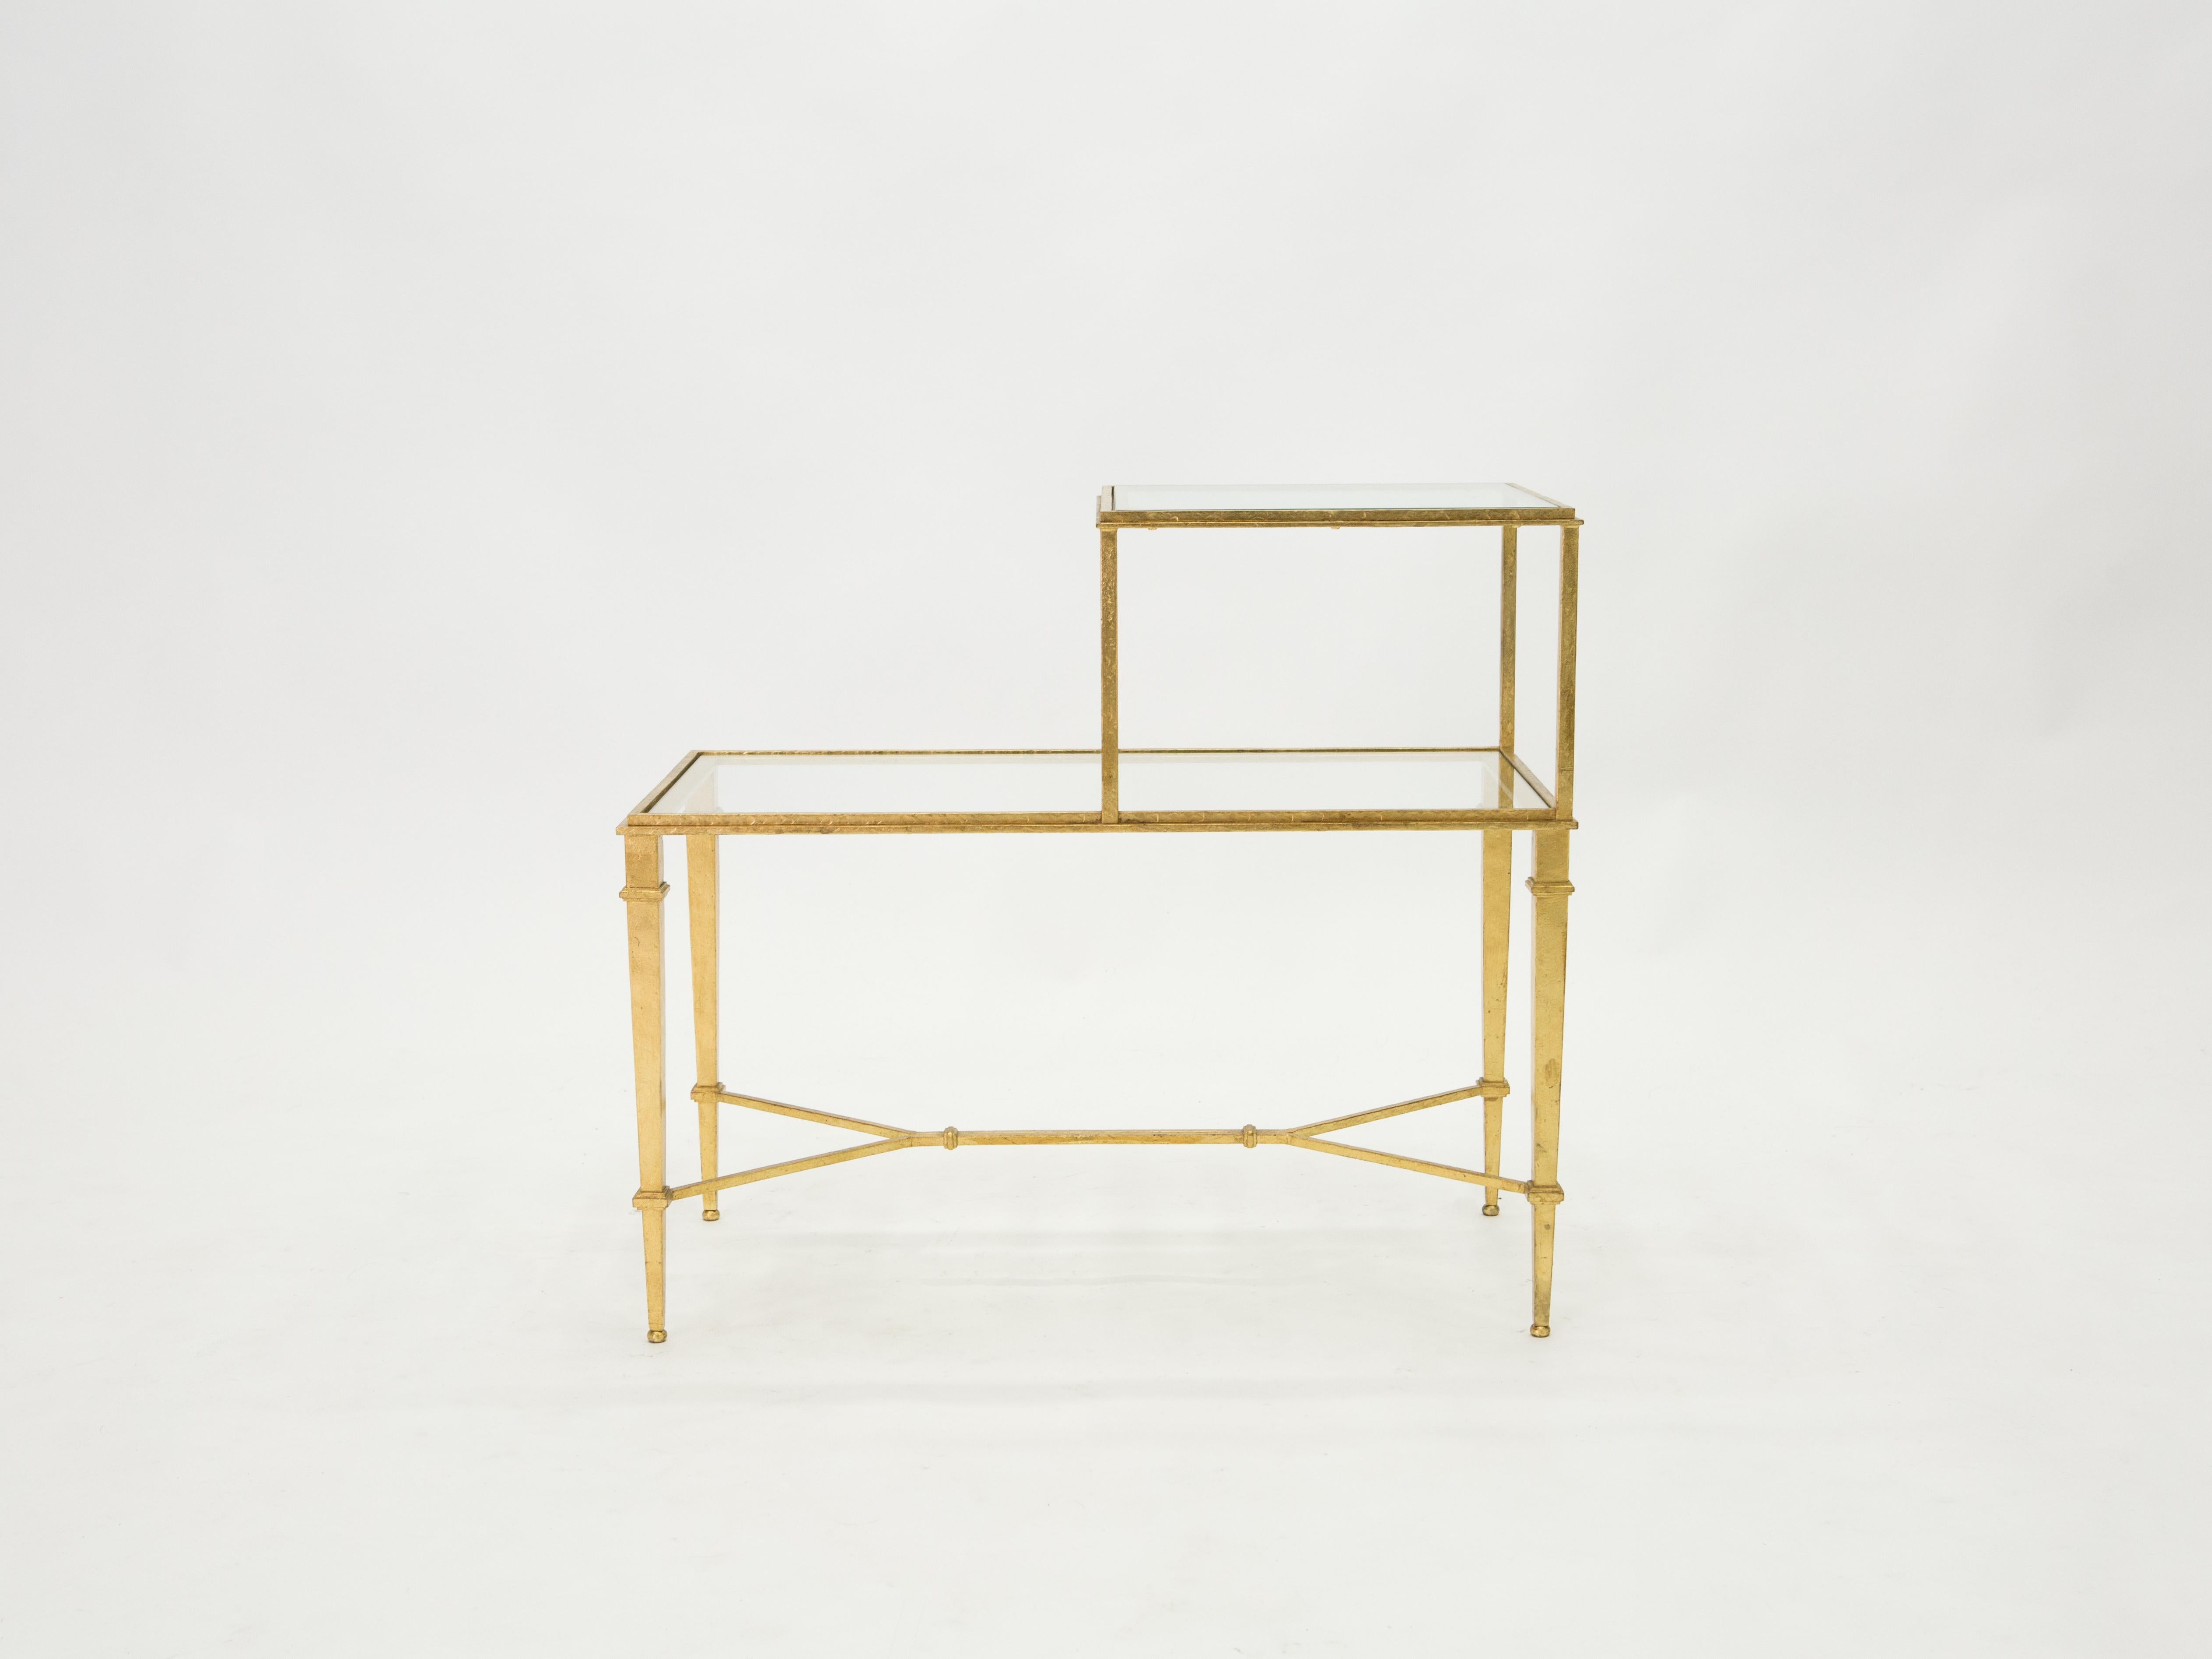 Grace your home with the true elegance of this side or end table signed and stamped by Roger and Robert Thibier in the 1960s. Glittering in an antiqued gold gilt finish, this original two-tier iron Craft side table adds a glam twist which makes a